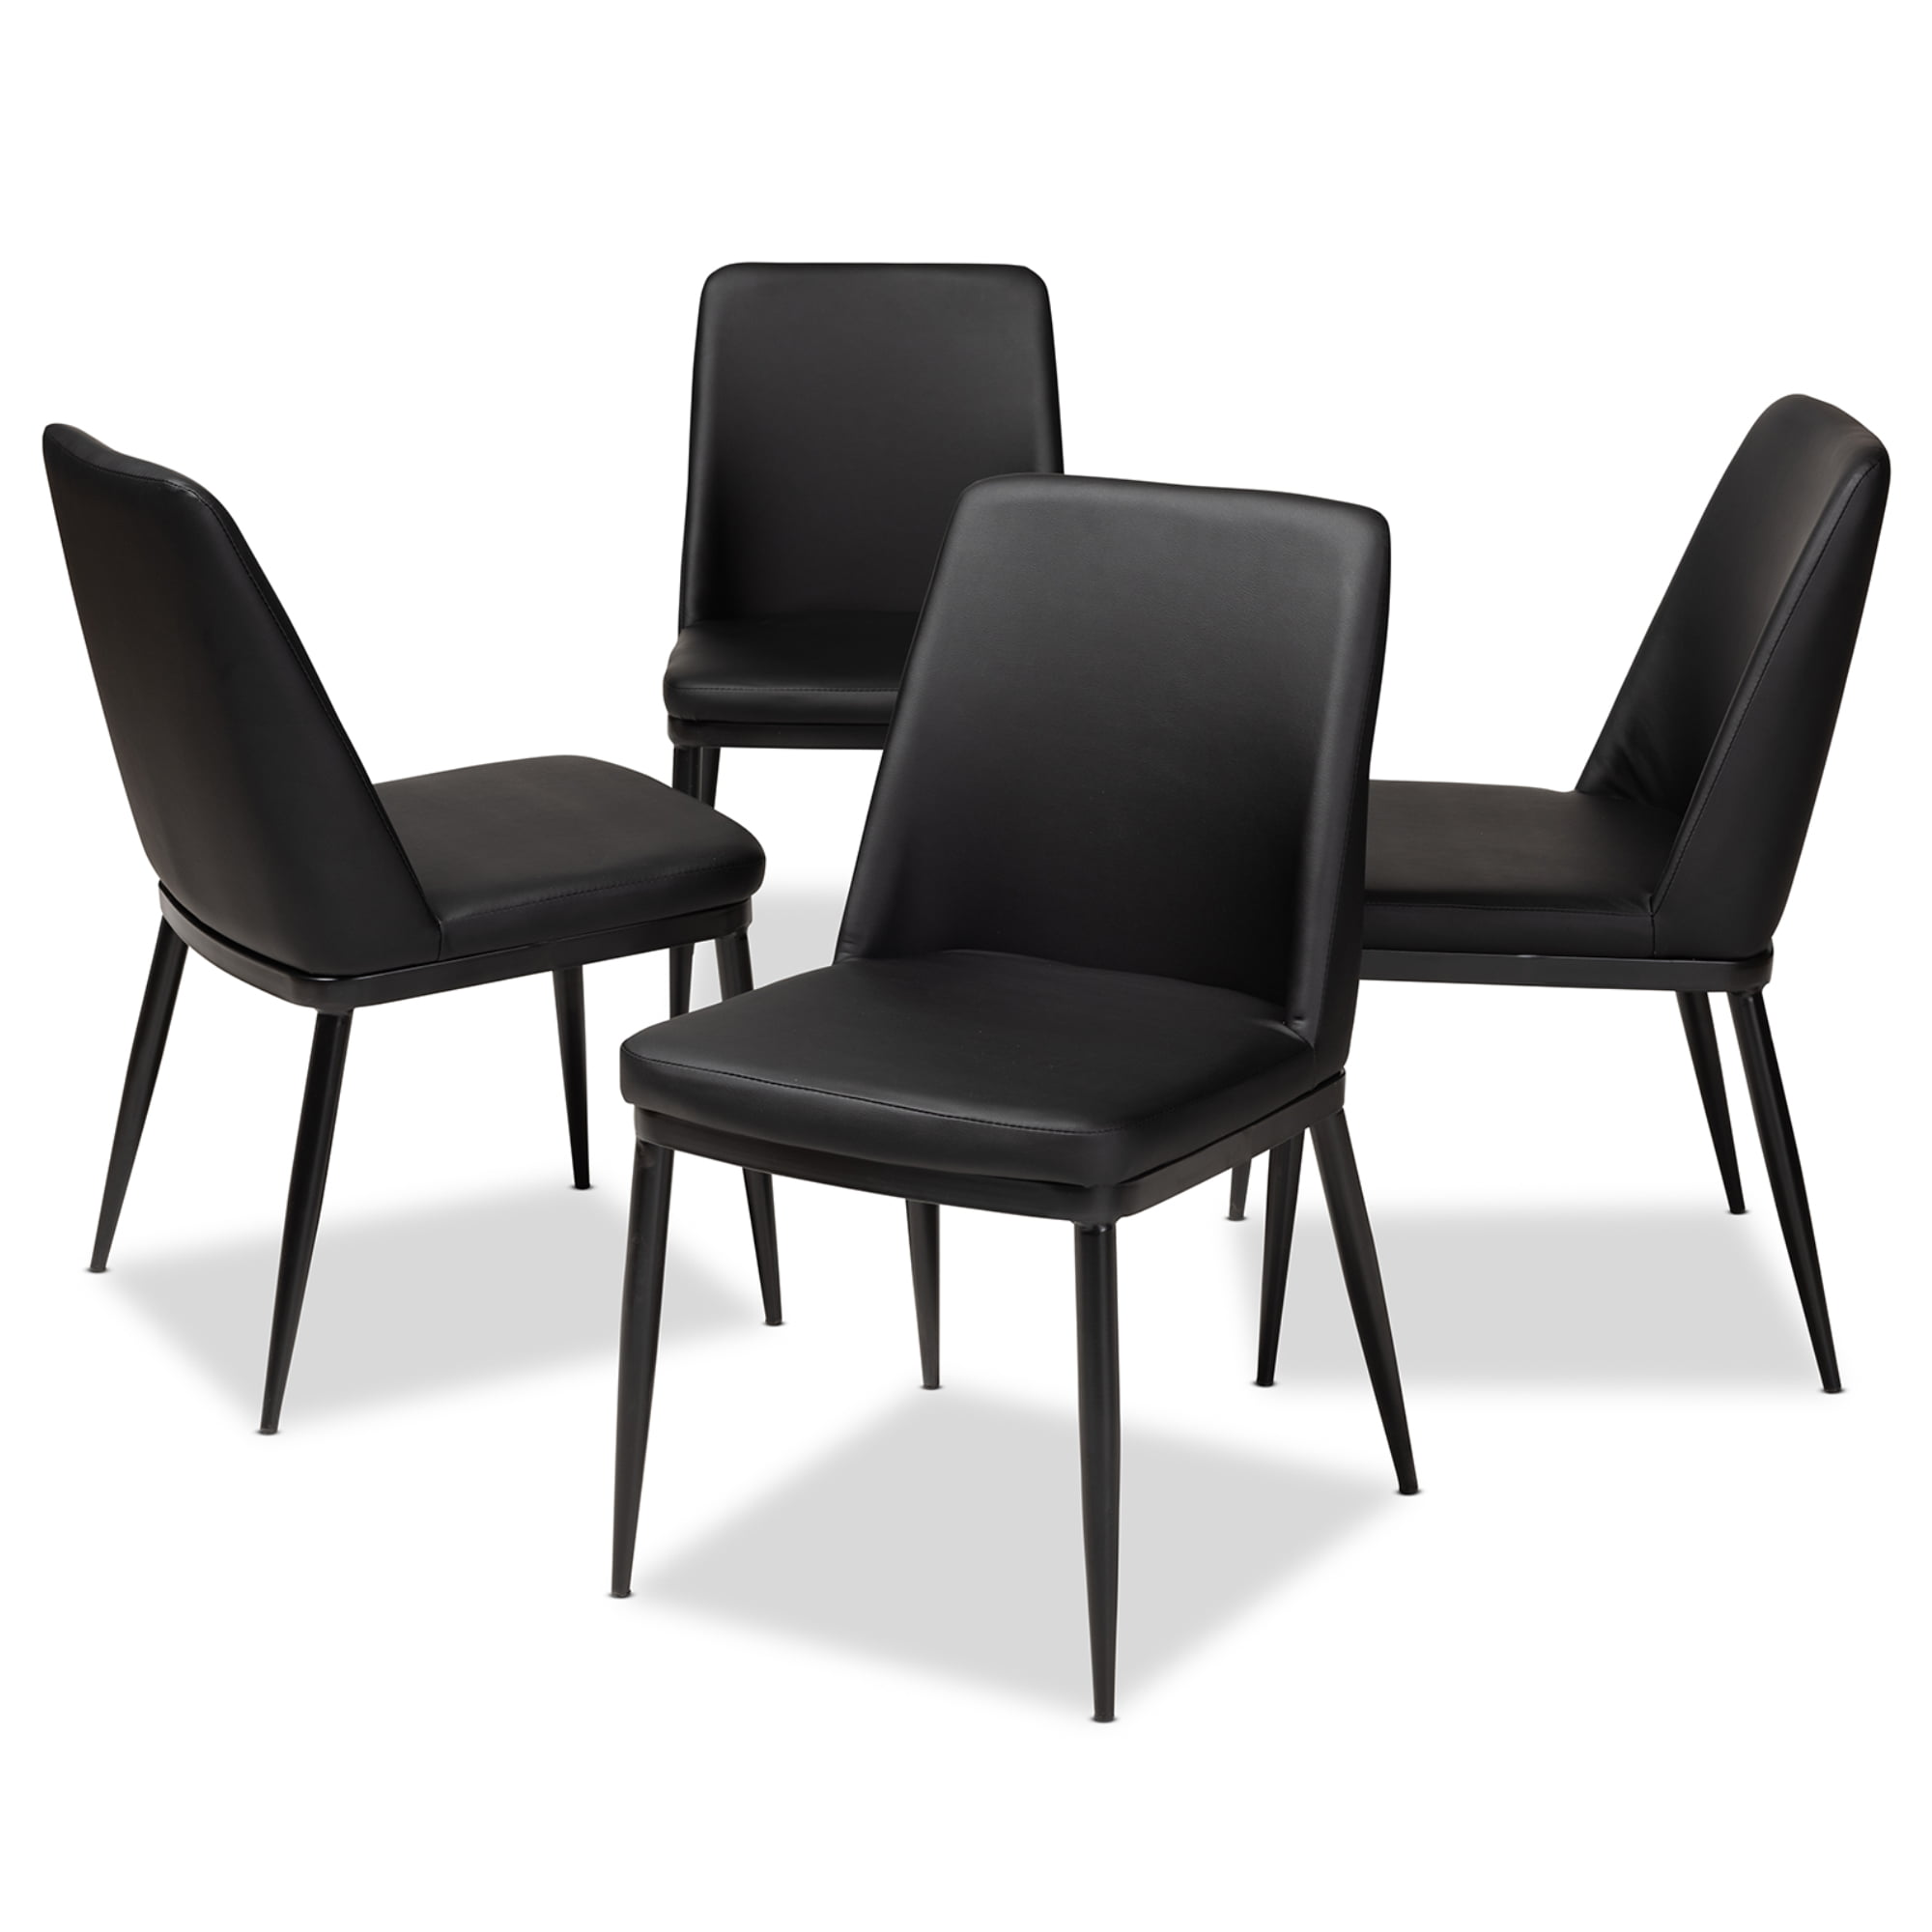 Set Of 4 Baxton Studio Darcell Modern, Leather Upholstery For Dining Chairs